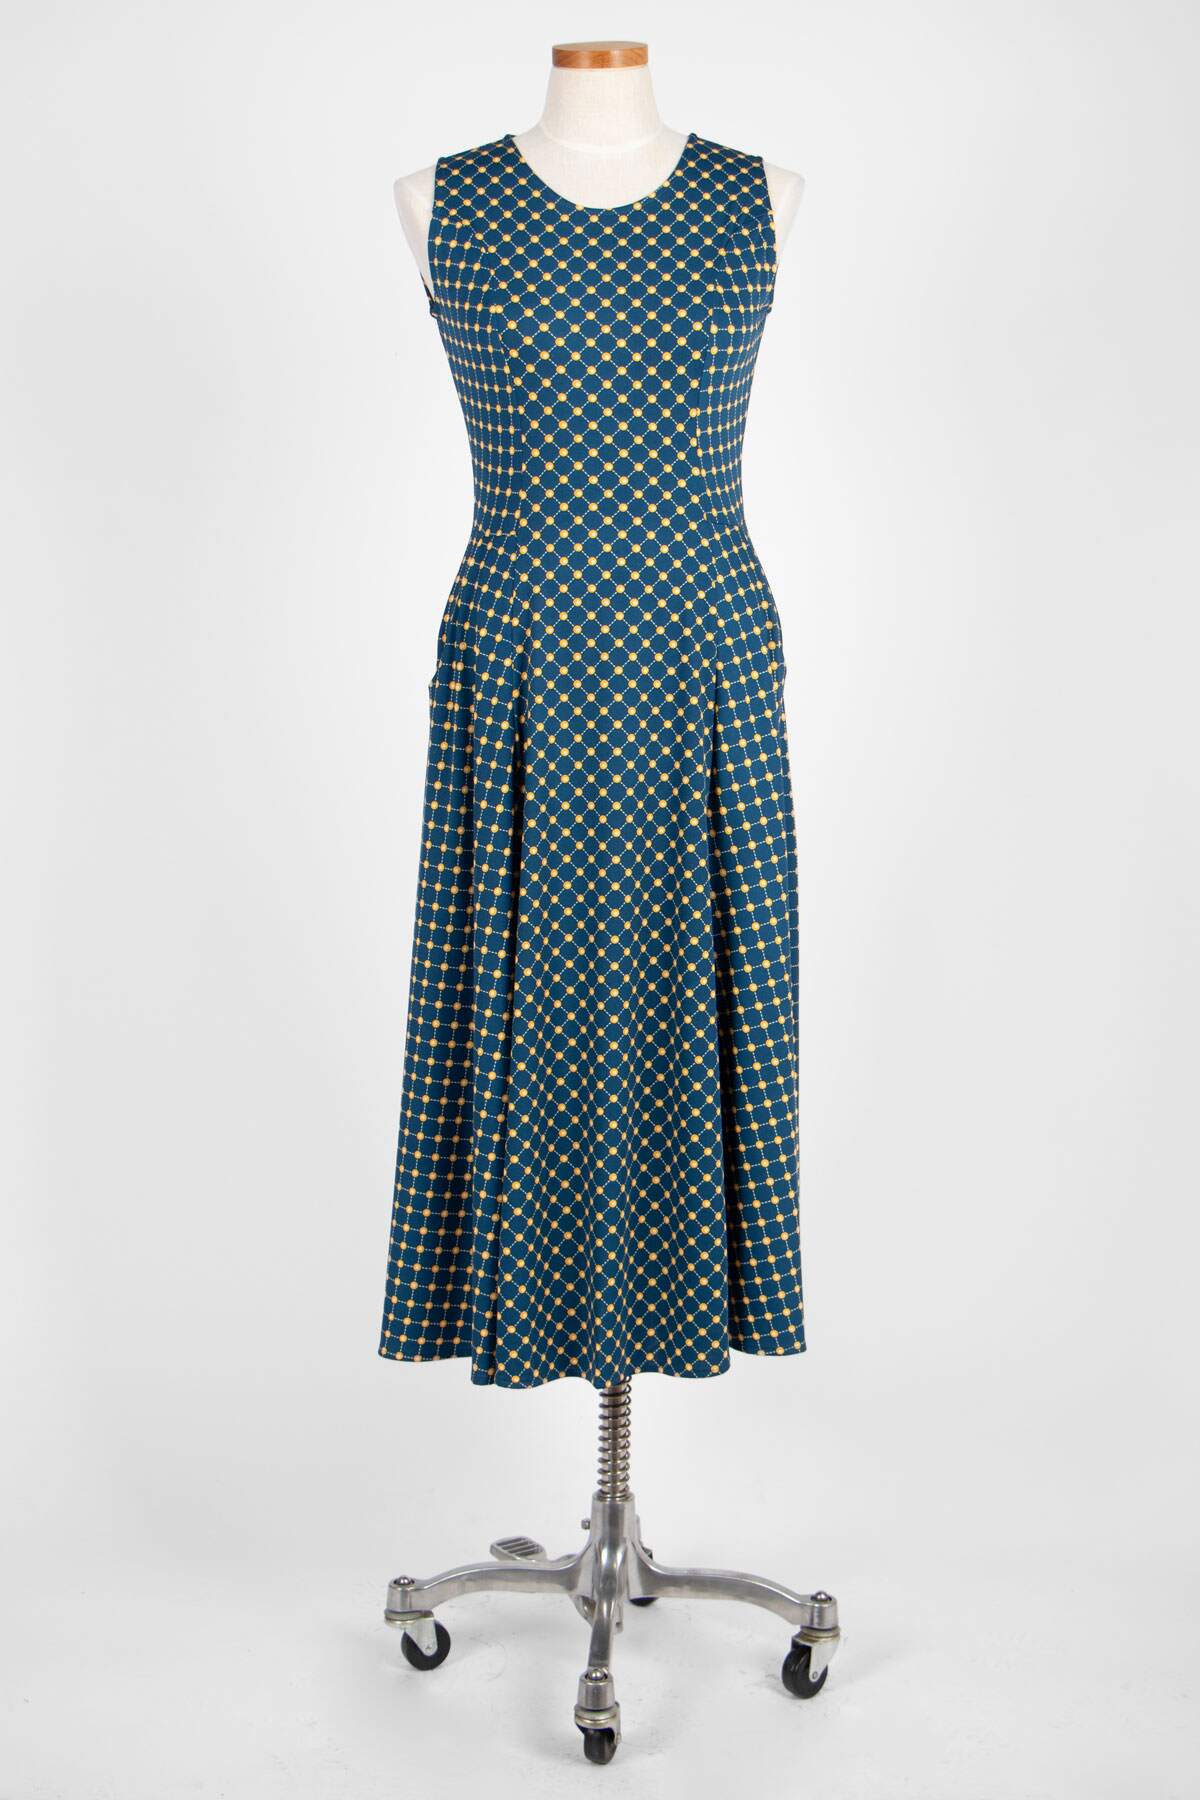 Cleo Dress in Navy and Gold Cross Dots by Karina Dresses